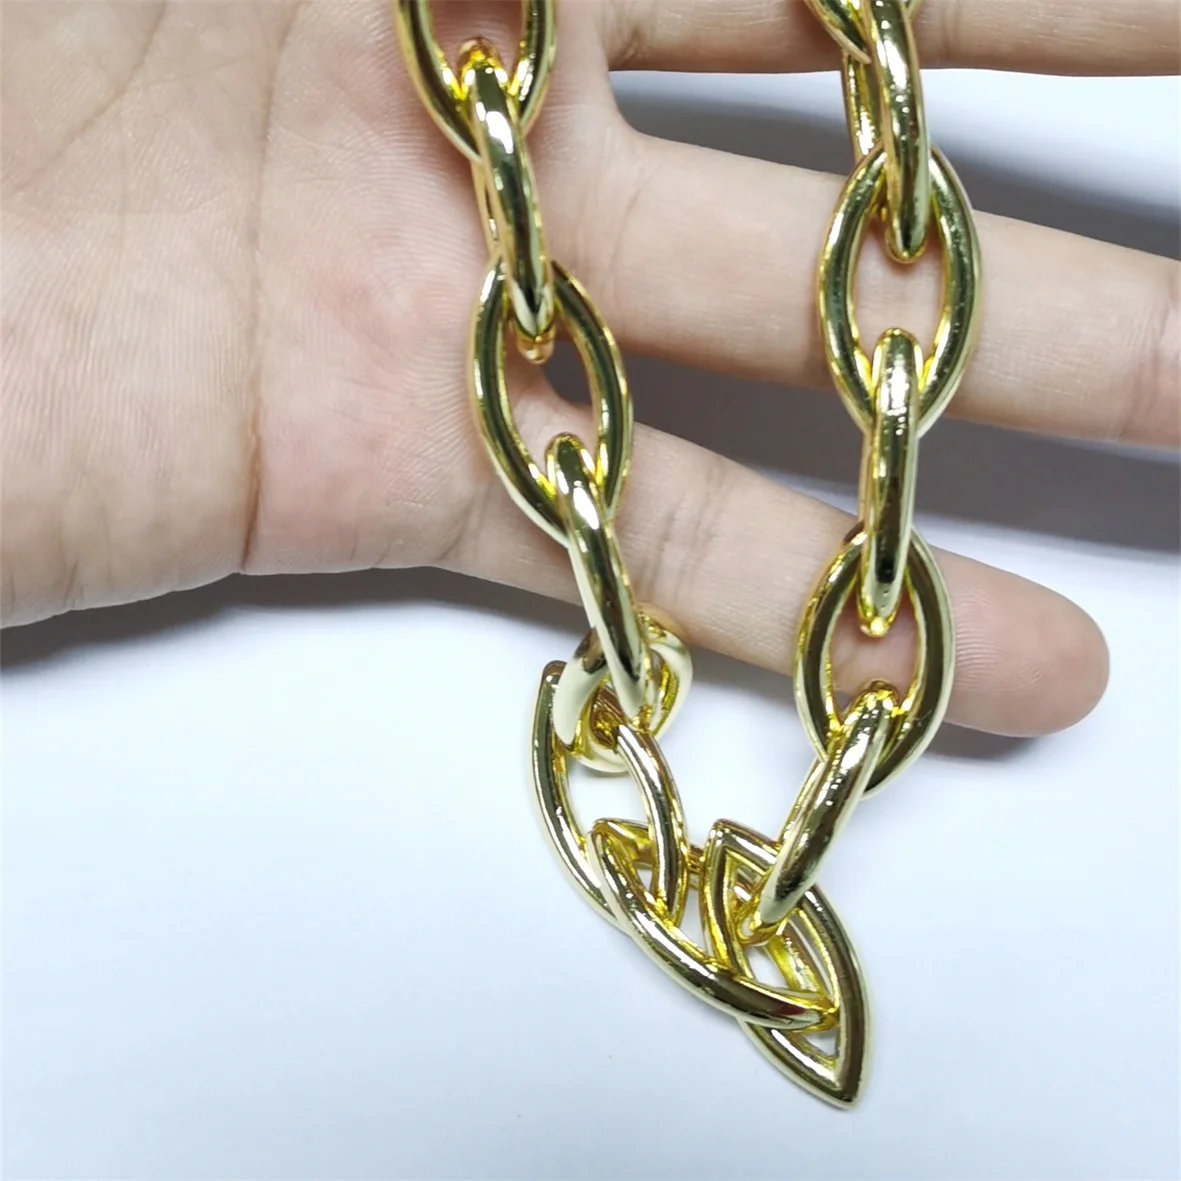 WT-BC172 Vintage Fashion Punk Flashing Leaf Shape Gold Plated Chain For Men Women Jewelry Accessoriess Wholesale